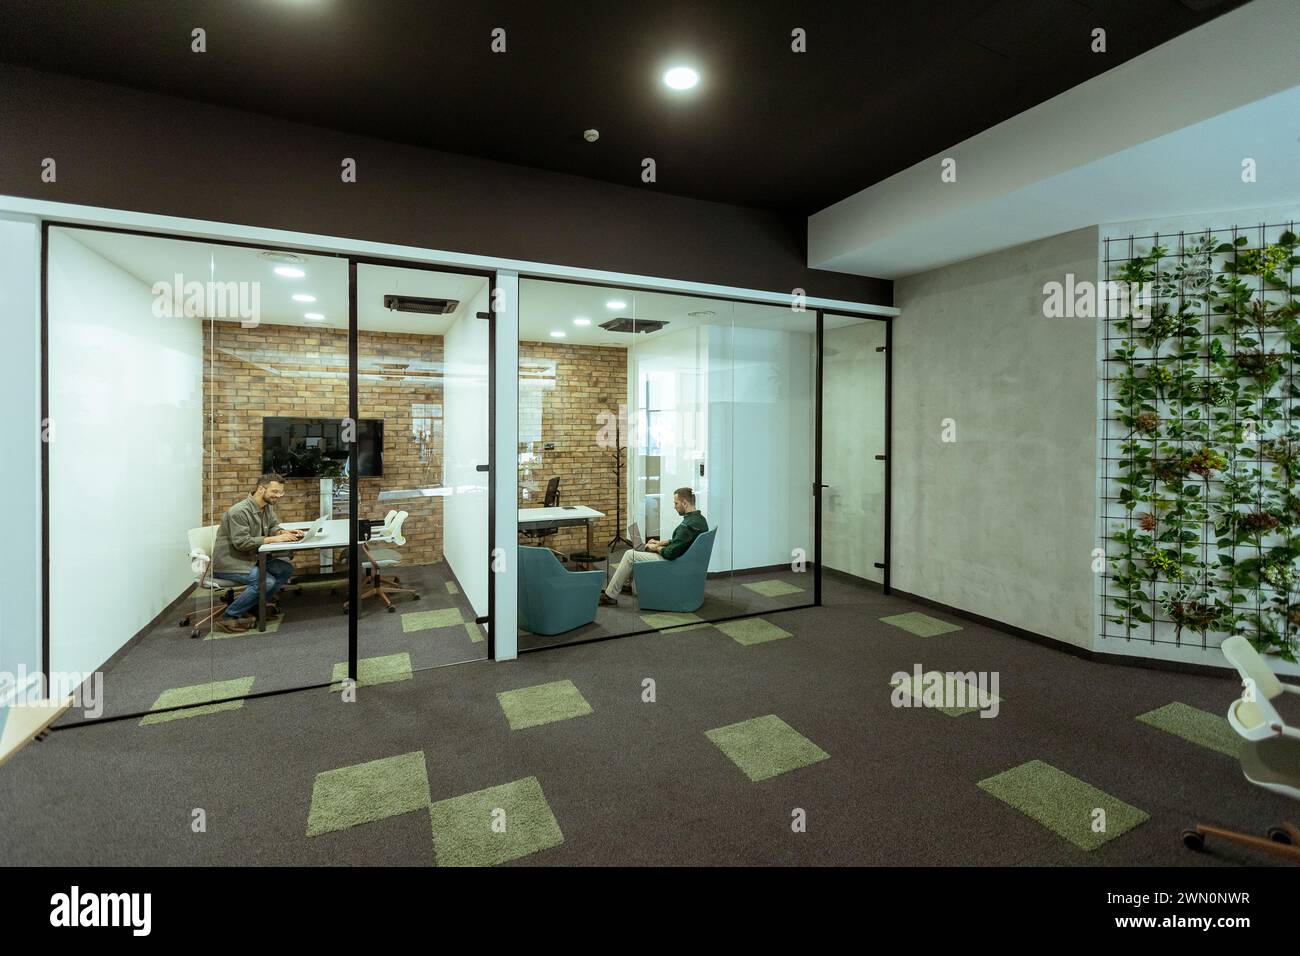 Person is immersed in a task in a stylish office with transparent glass walls. The modern design includes exposed brick, a sleek monitor, comfortable Stock Photo